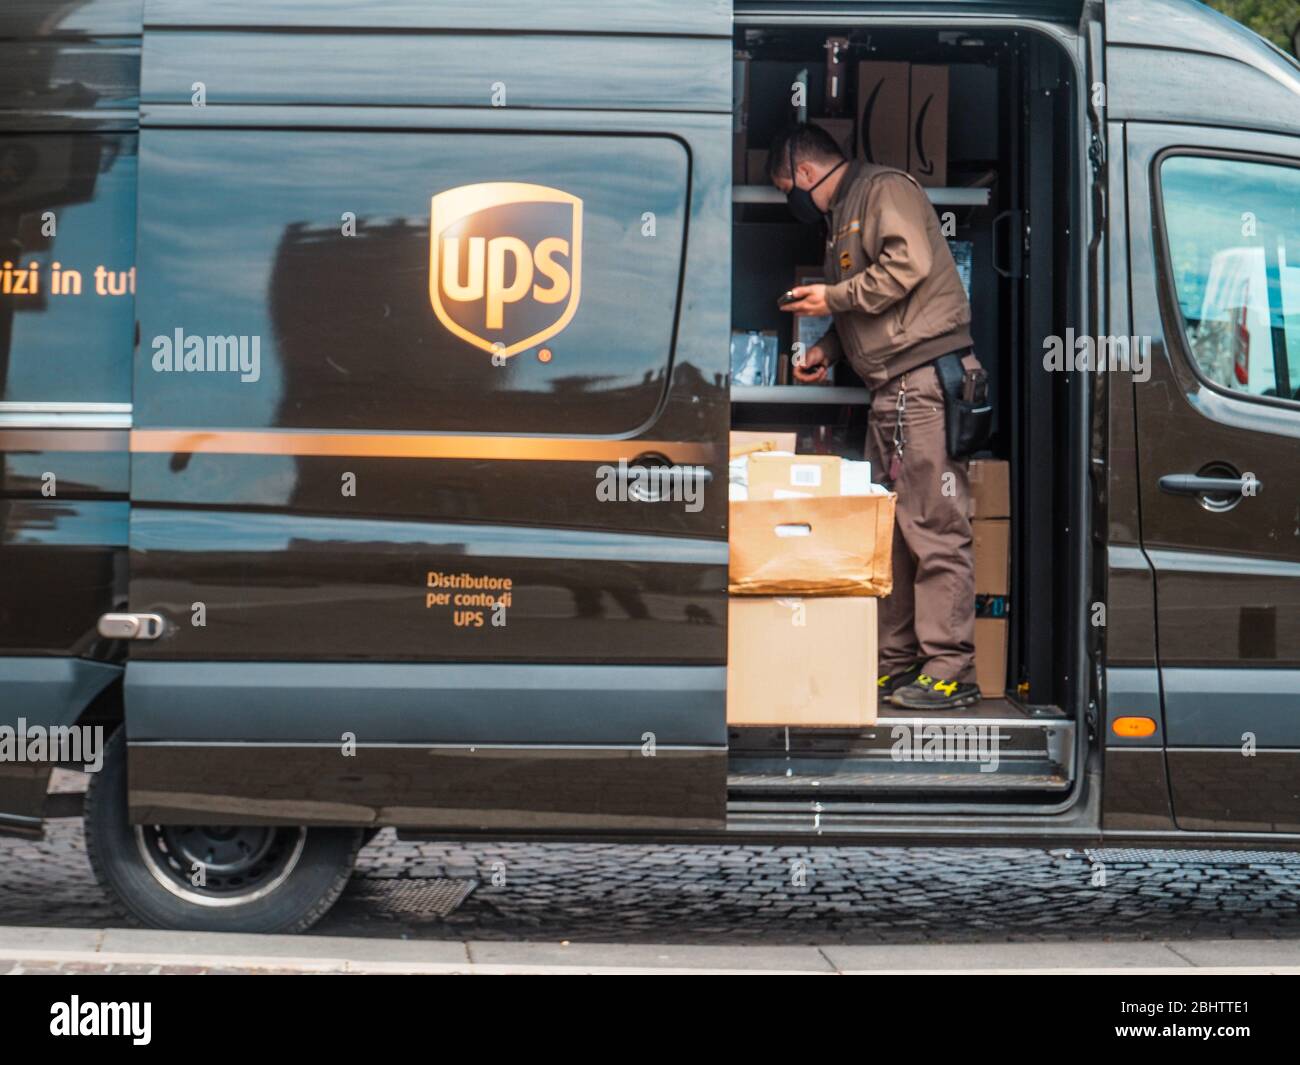 Ups Truck High Resolution Stock Photography and Images - Alamy